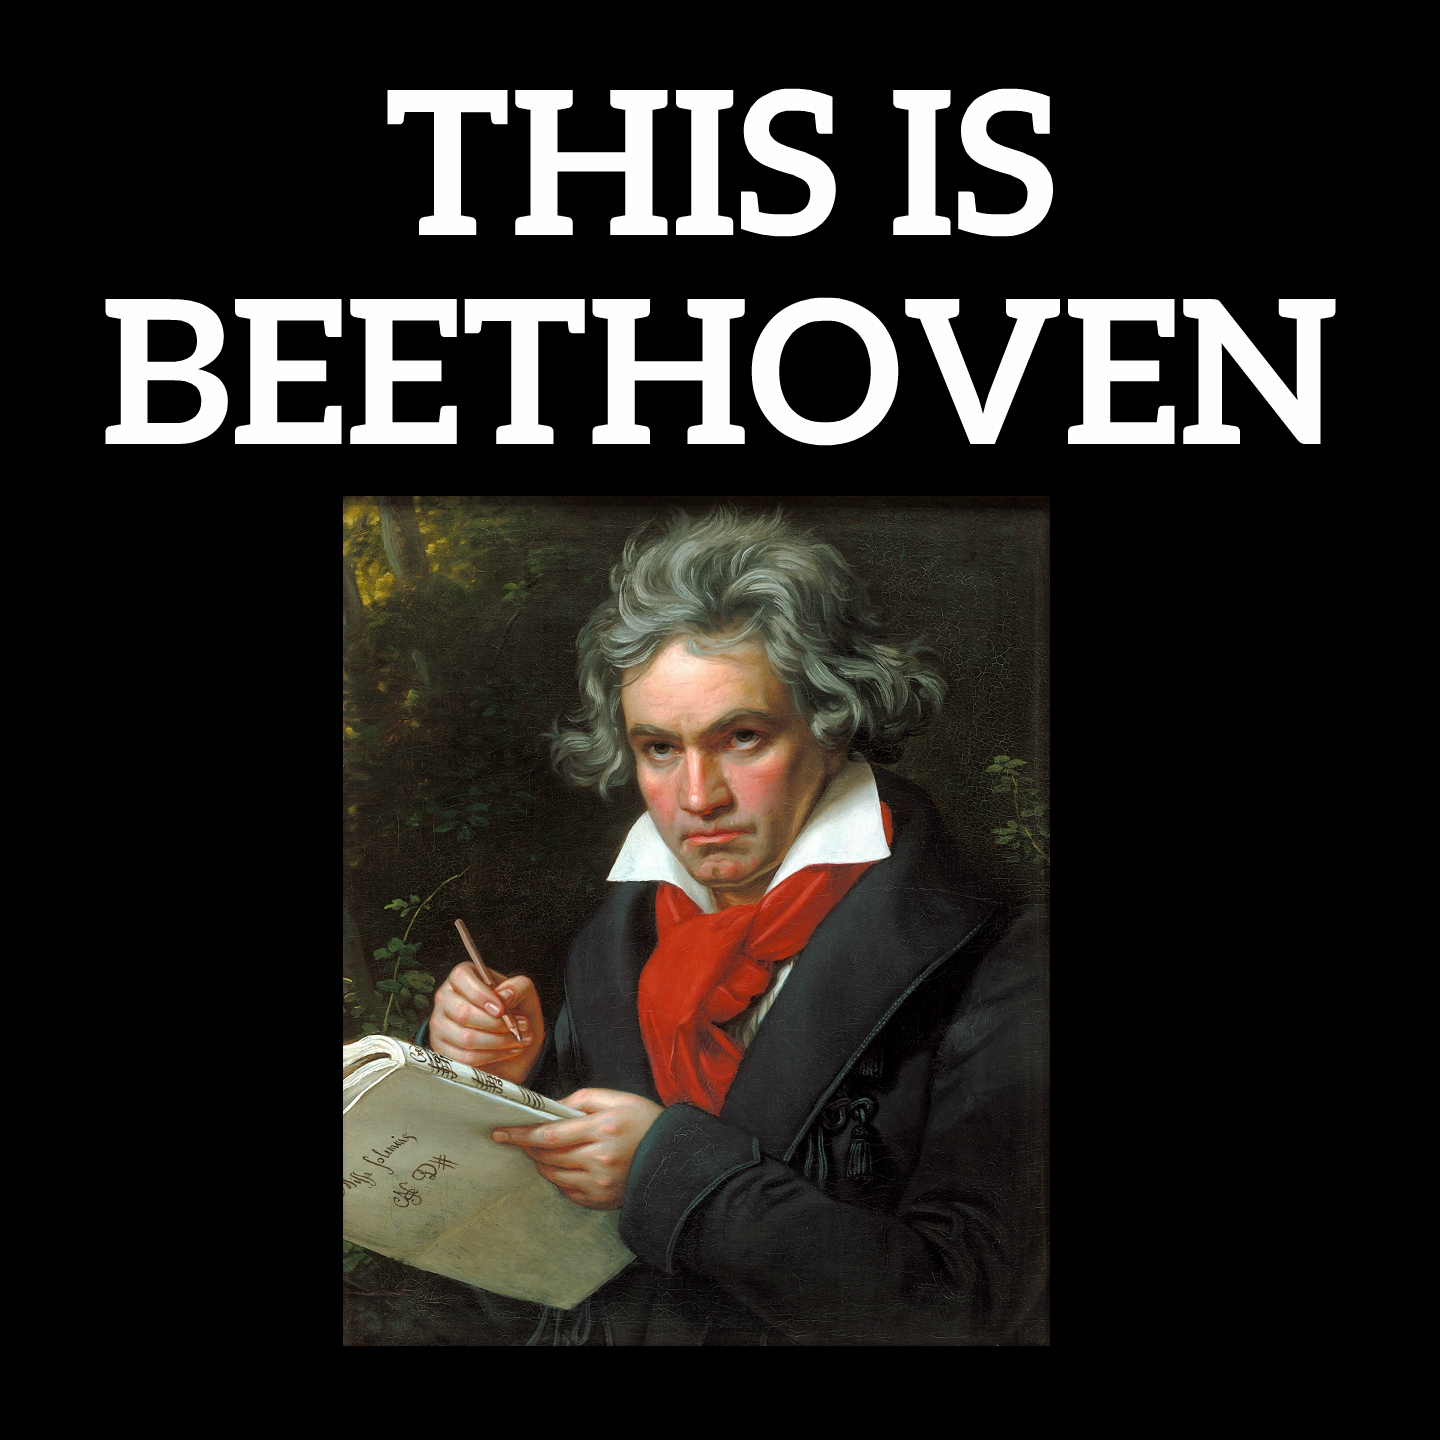 This is Beethoven